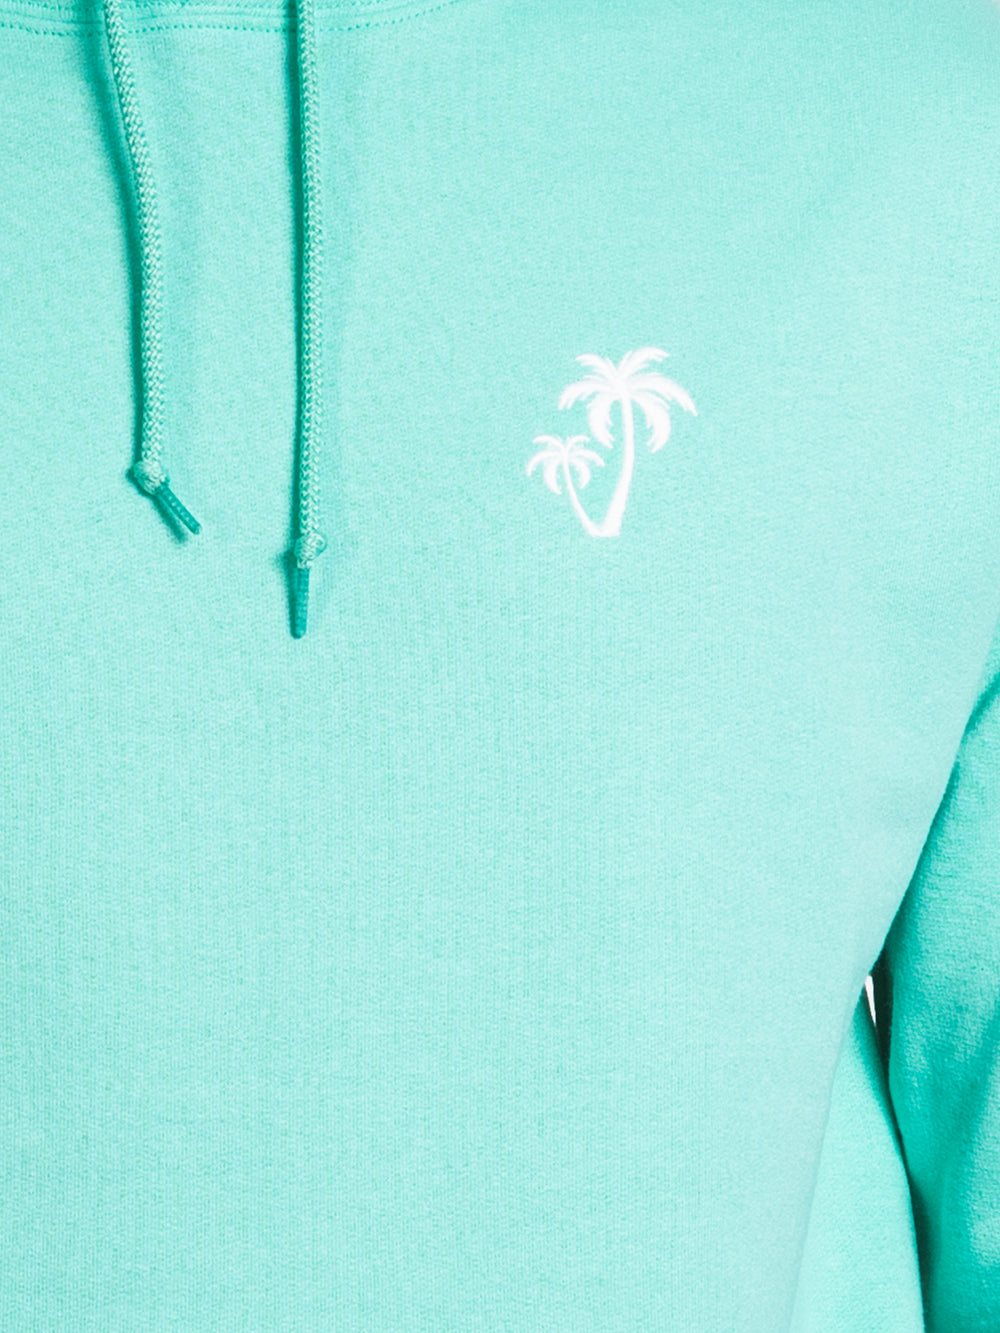 PALM EMBROIDERED HOODIE - CLEARANCE